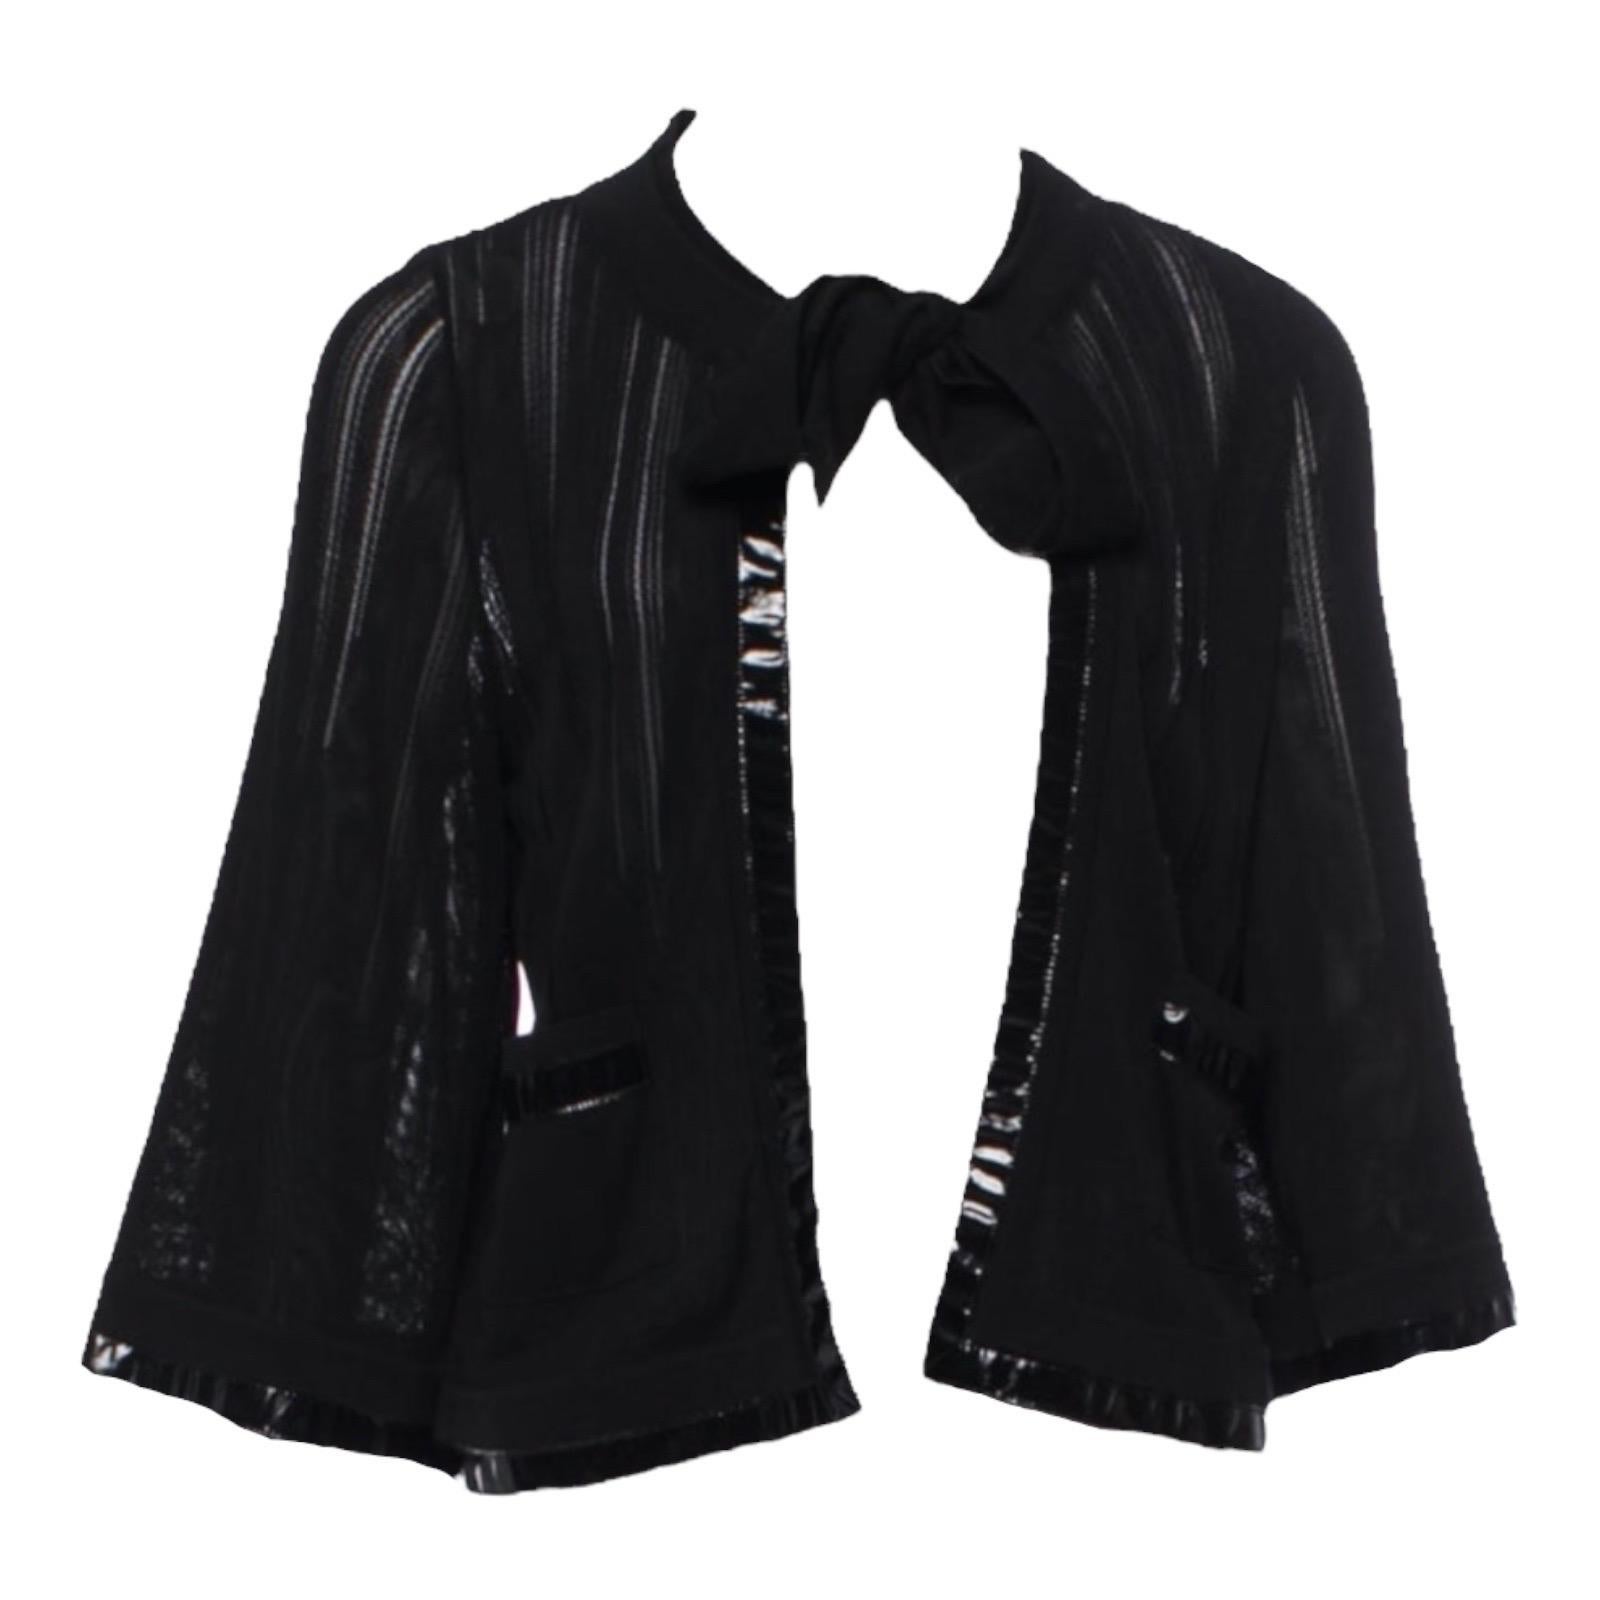 Chanel Black Knit Jacket Cardigan with Vinyl Trimmings 40